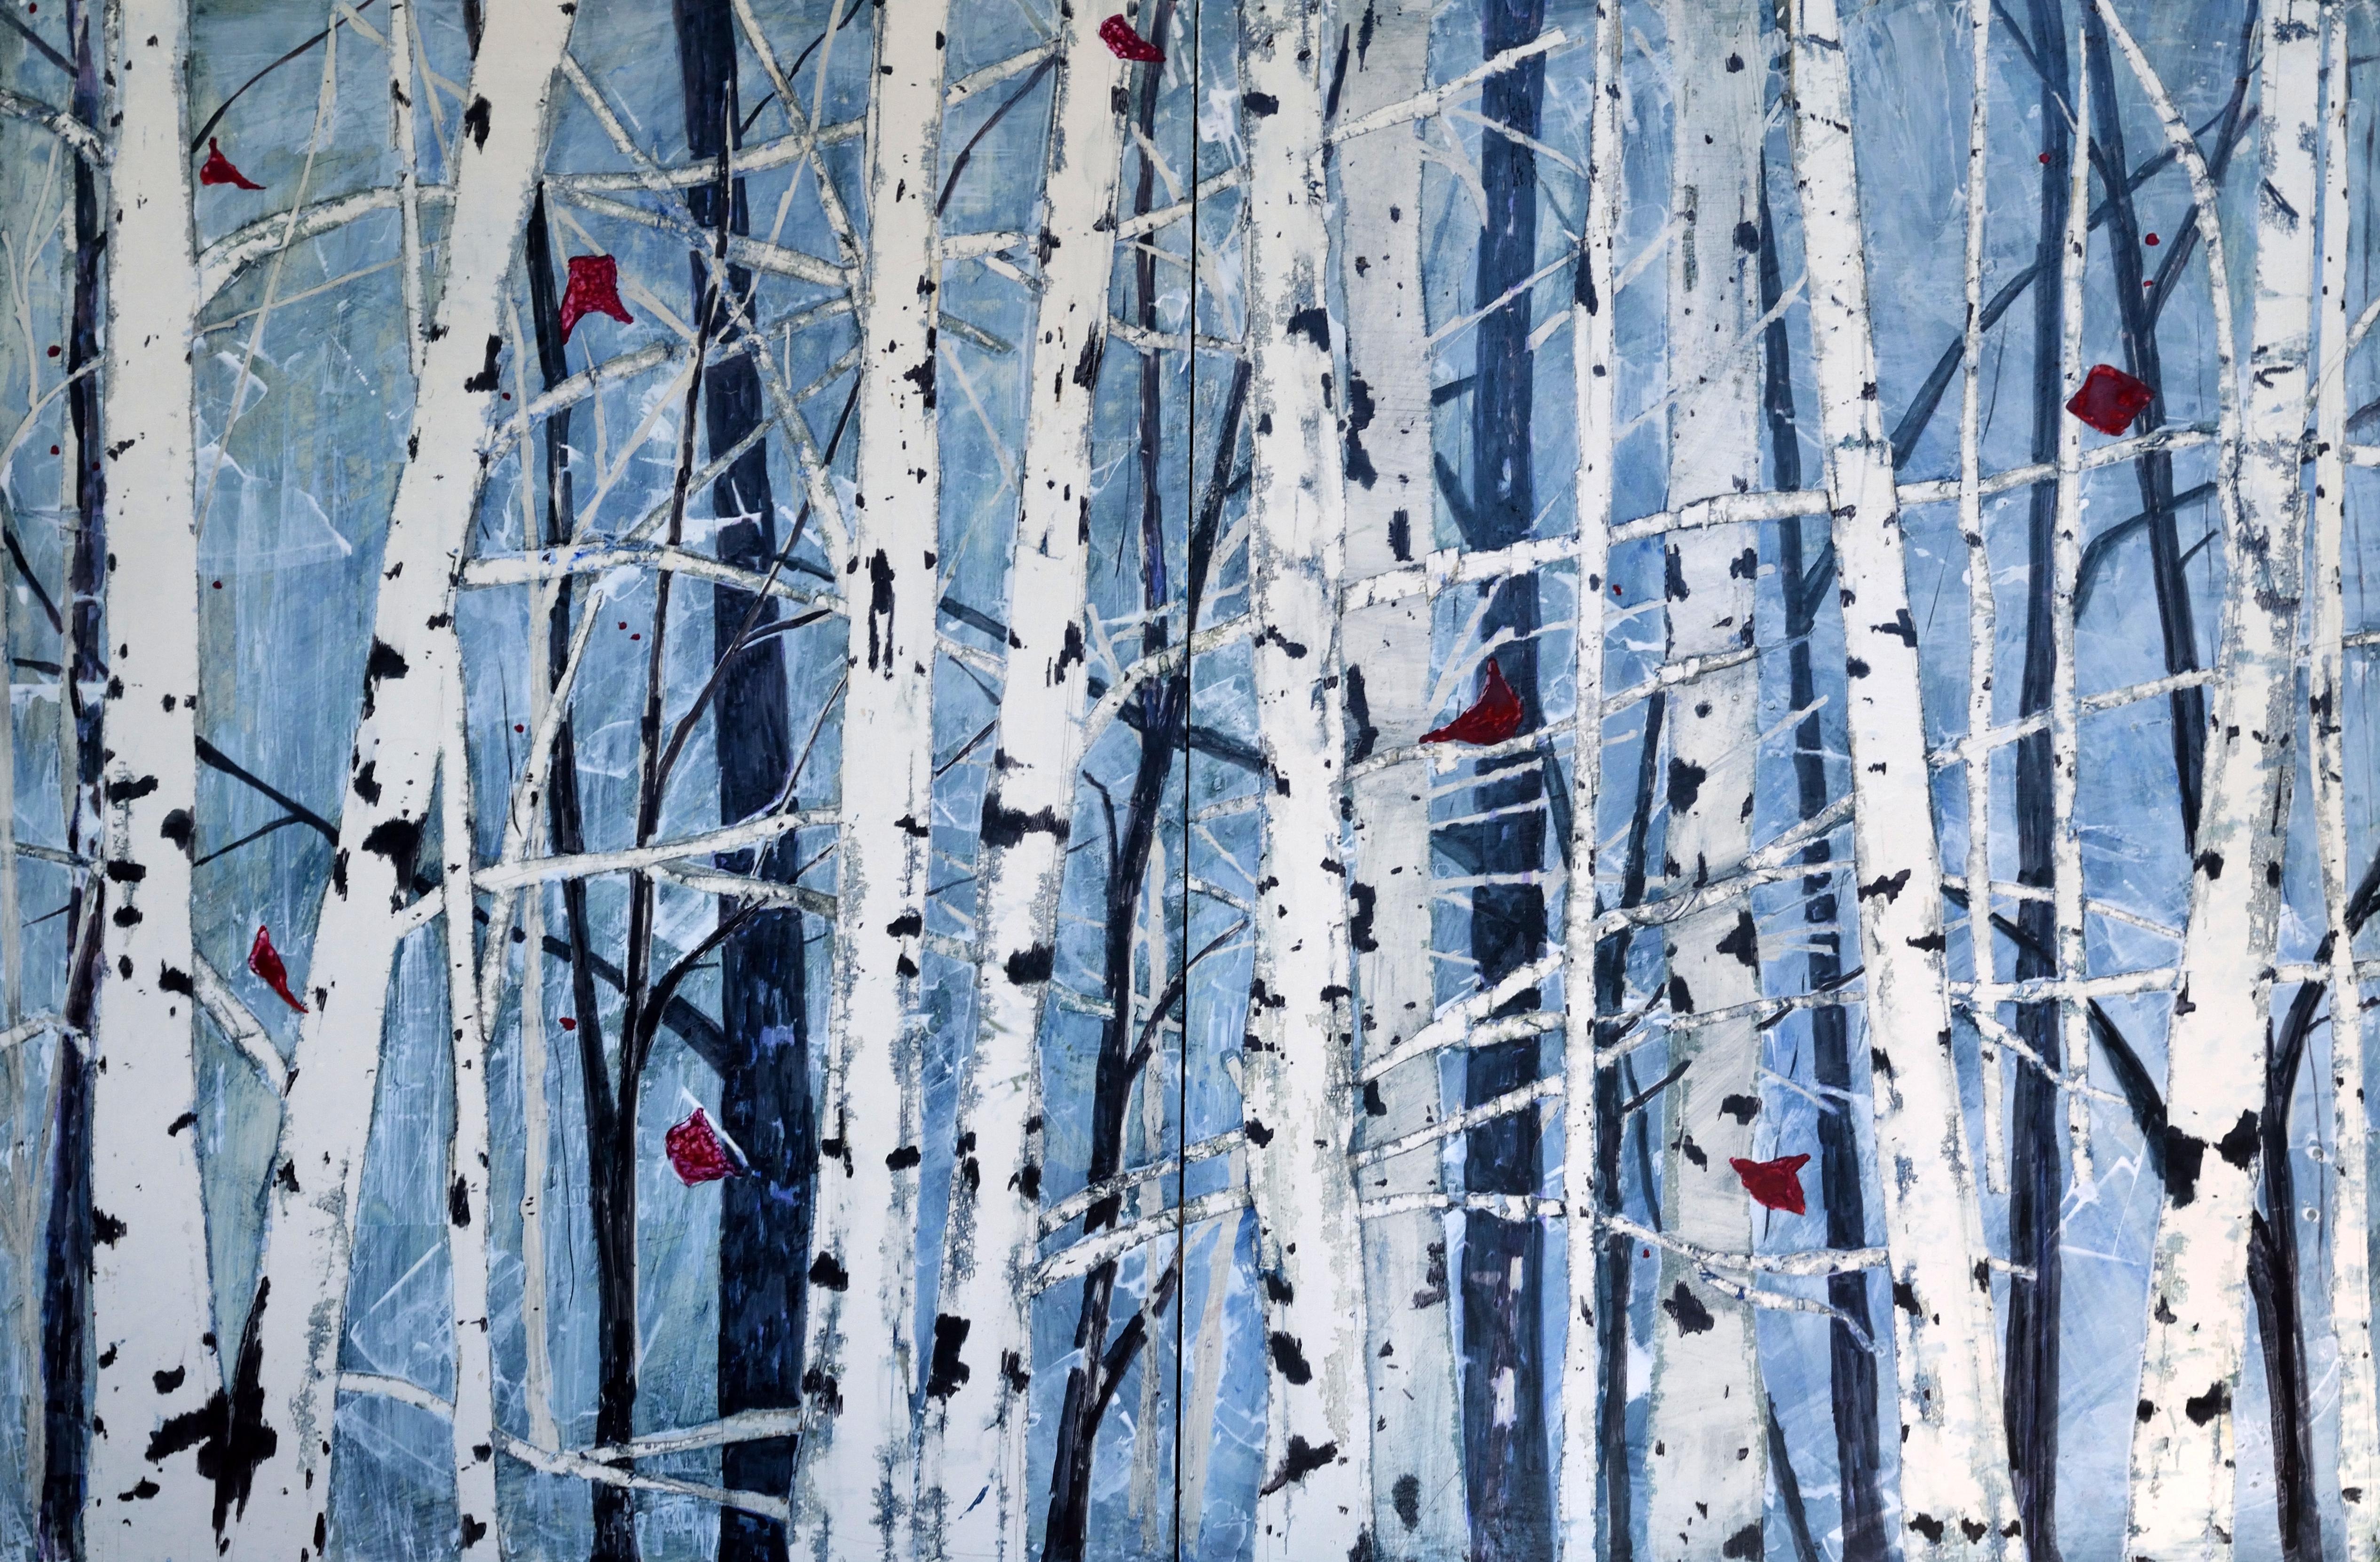 Tamara Gonda Landscape Painting - Song Walking, Original Contemporary Blue and White Mixed Media Diptych Painting